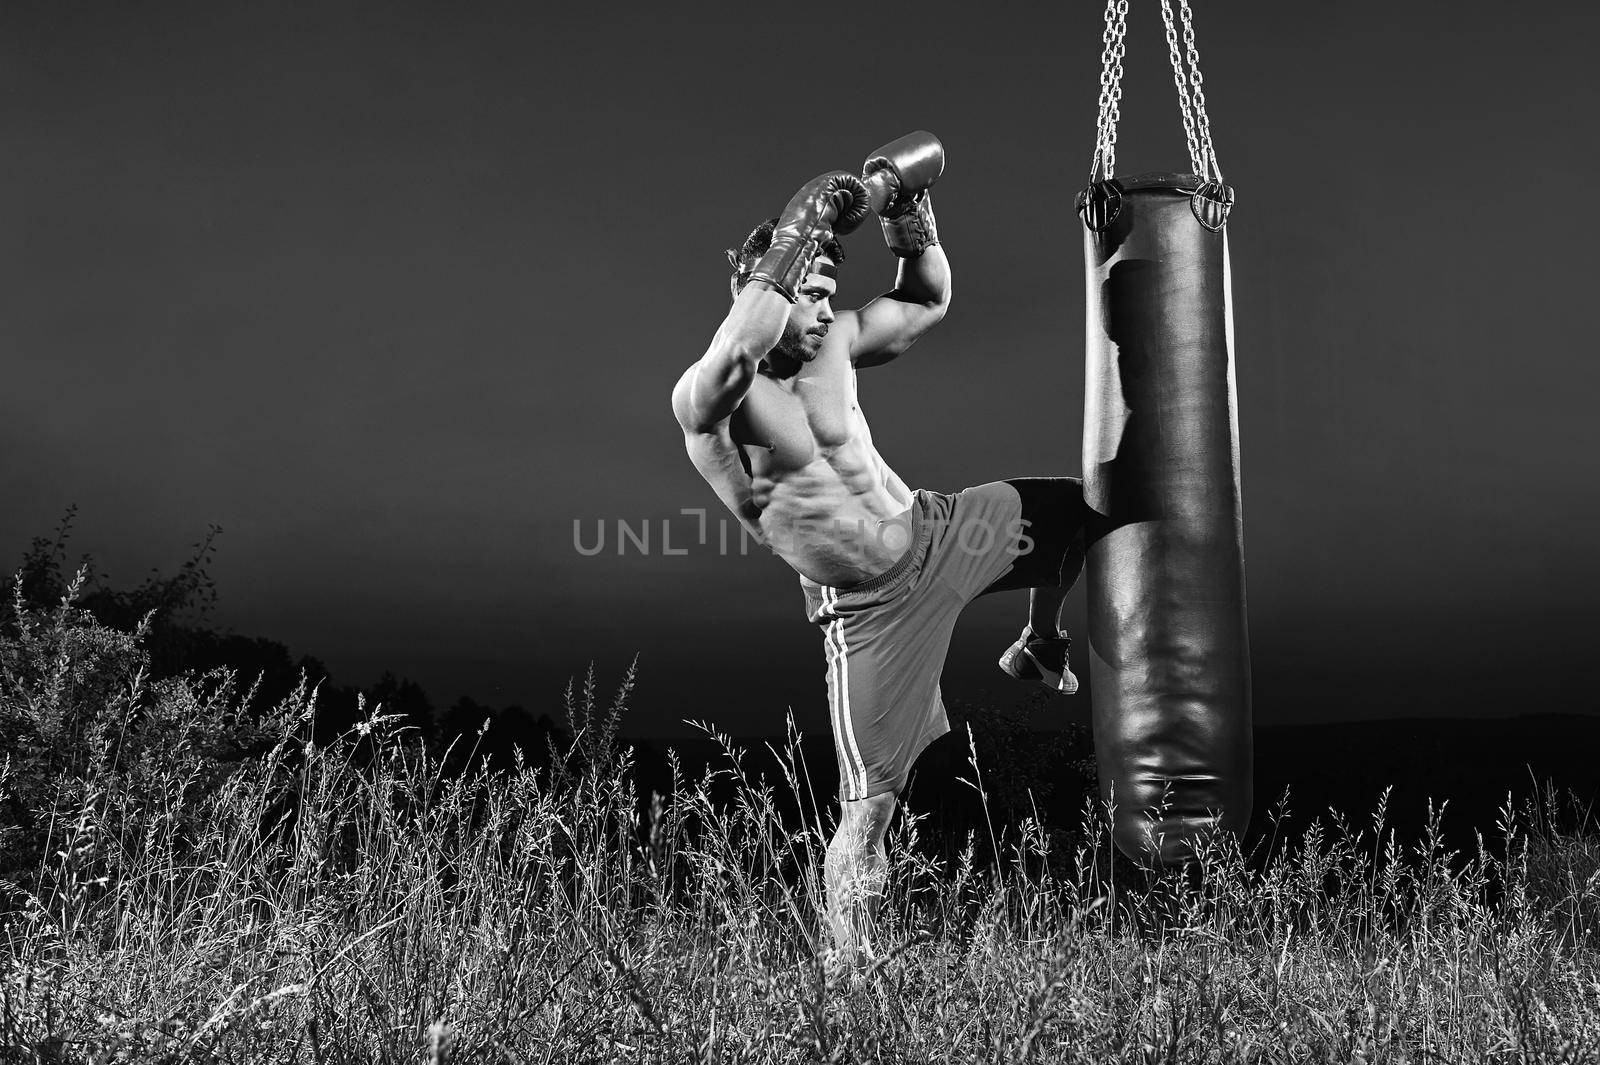 Black and white shot of a kick boxer training on a heavy bag outdoors kicking it with his knee copyspace kickboxing martial arts combat fighting practicing performance concentration determination.